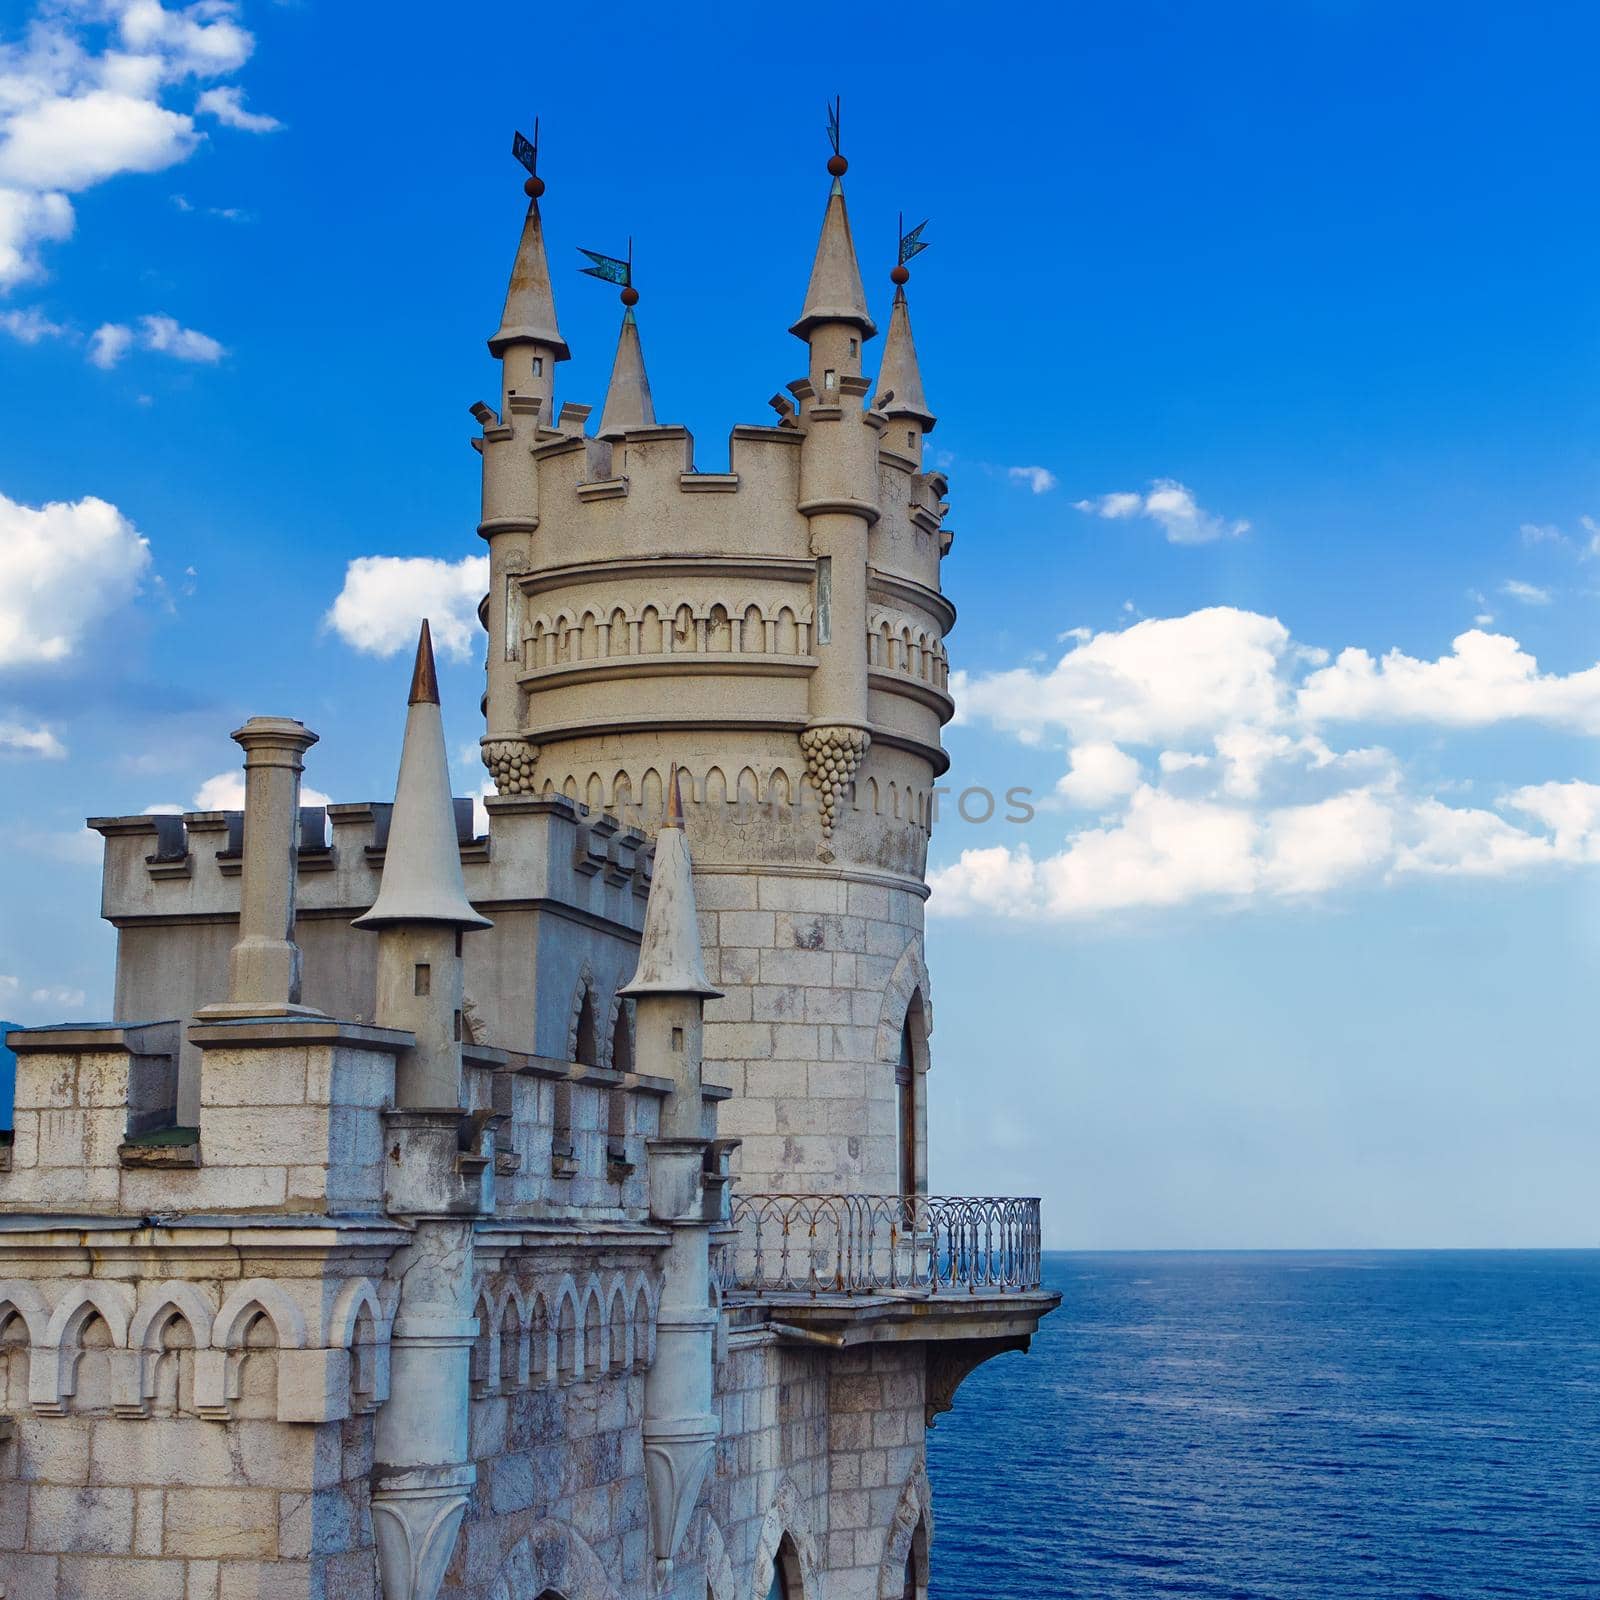 Medieval castle agains blue sky with clouds. Swallow's Nest, The Crimean Peninsula, Ukraine.